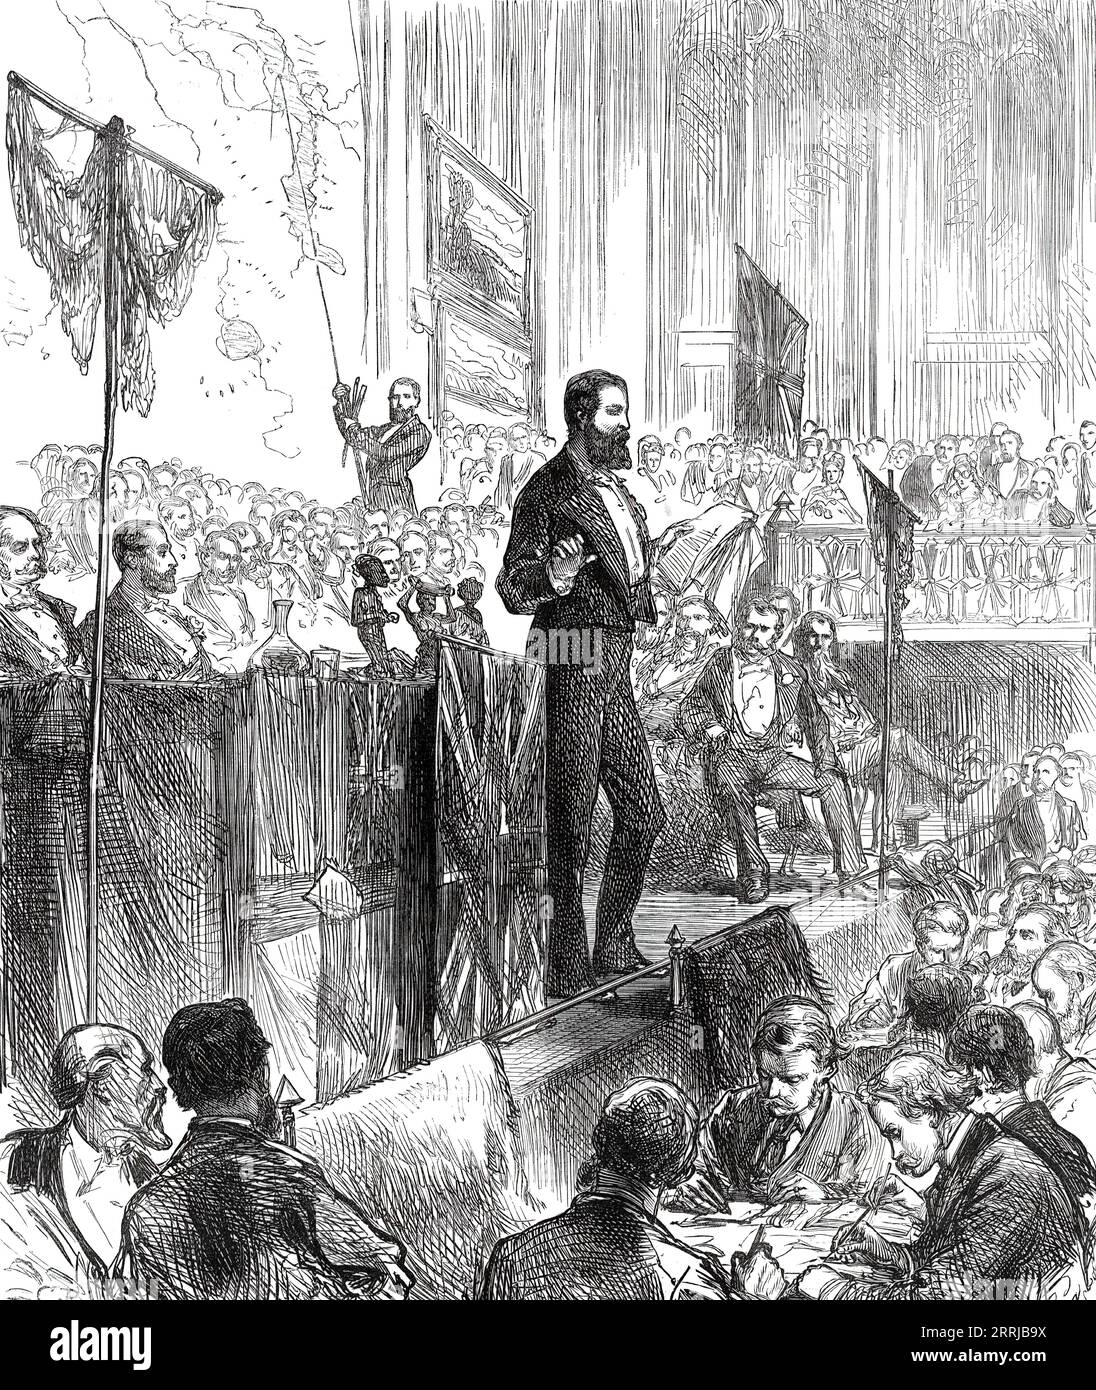 Lieutenant Cameron at the Meeting of the Royal Geographical Society, 1876. 'The lecture which was delivered by [British explorer and naval officer] Lieutenant Cameron on Tuesday week to the members of the Royal Geographical Society and their friends assembled in St. James's Hall was listened to with great interest. The chair was occupied by his Royal Highness the Duke of Edinburgh, for the first time since he has been president of the society...The founder's medal for the year, for the encouragement of geographical science and discovery, was presented to Lieutenant Cameron for his journey acro Stock Photo